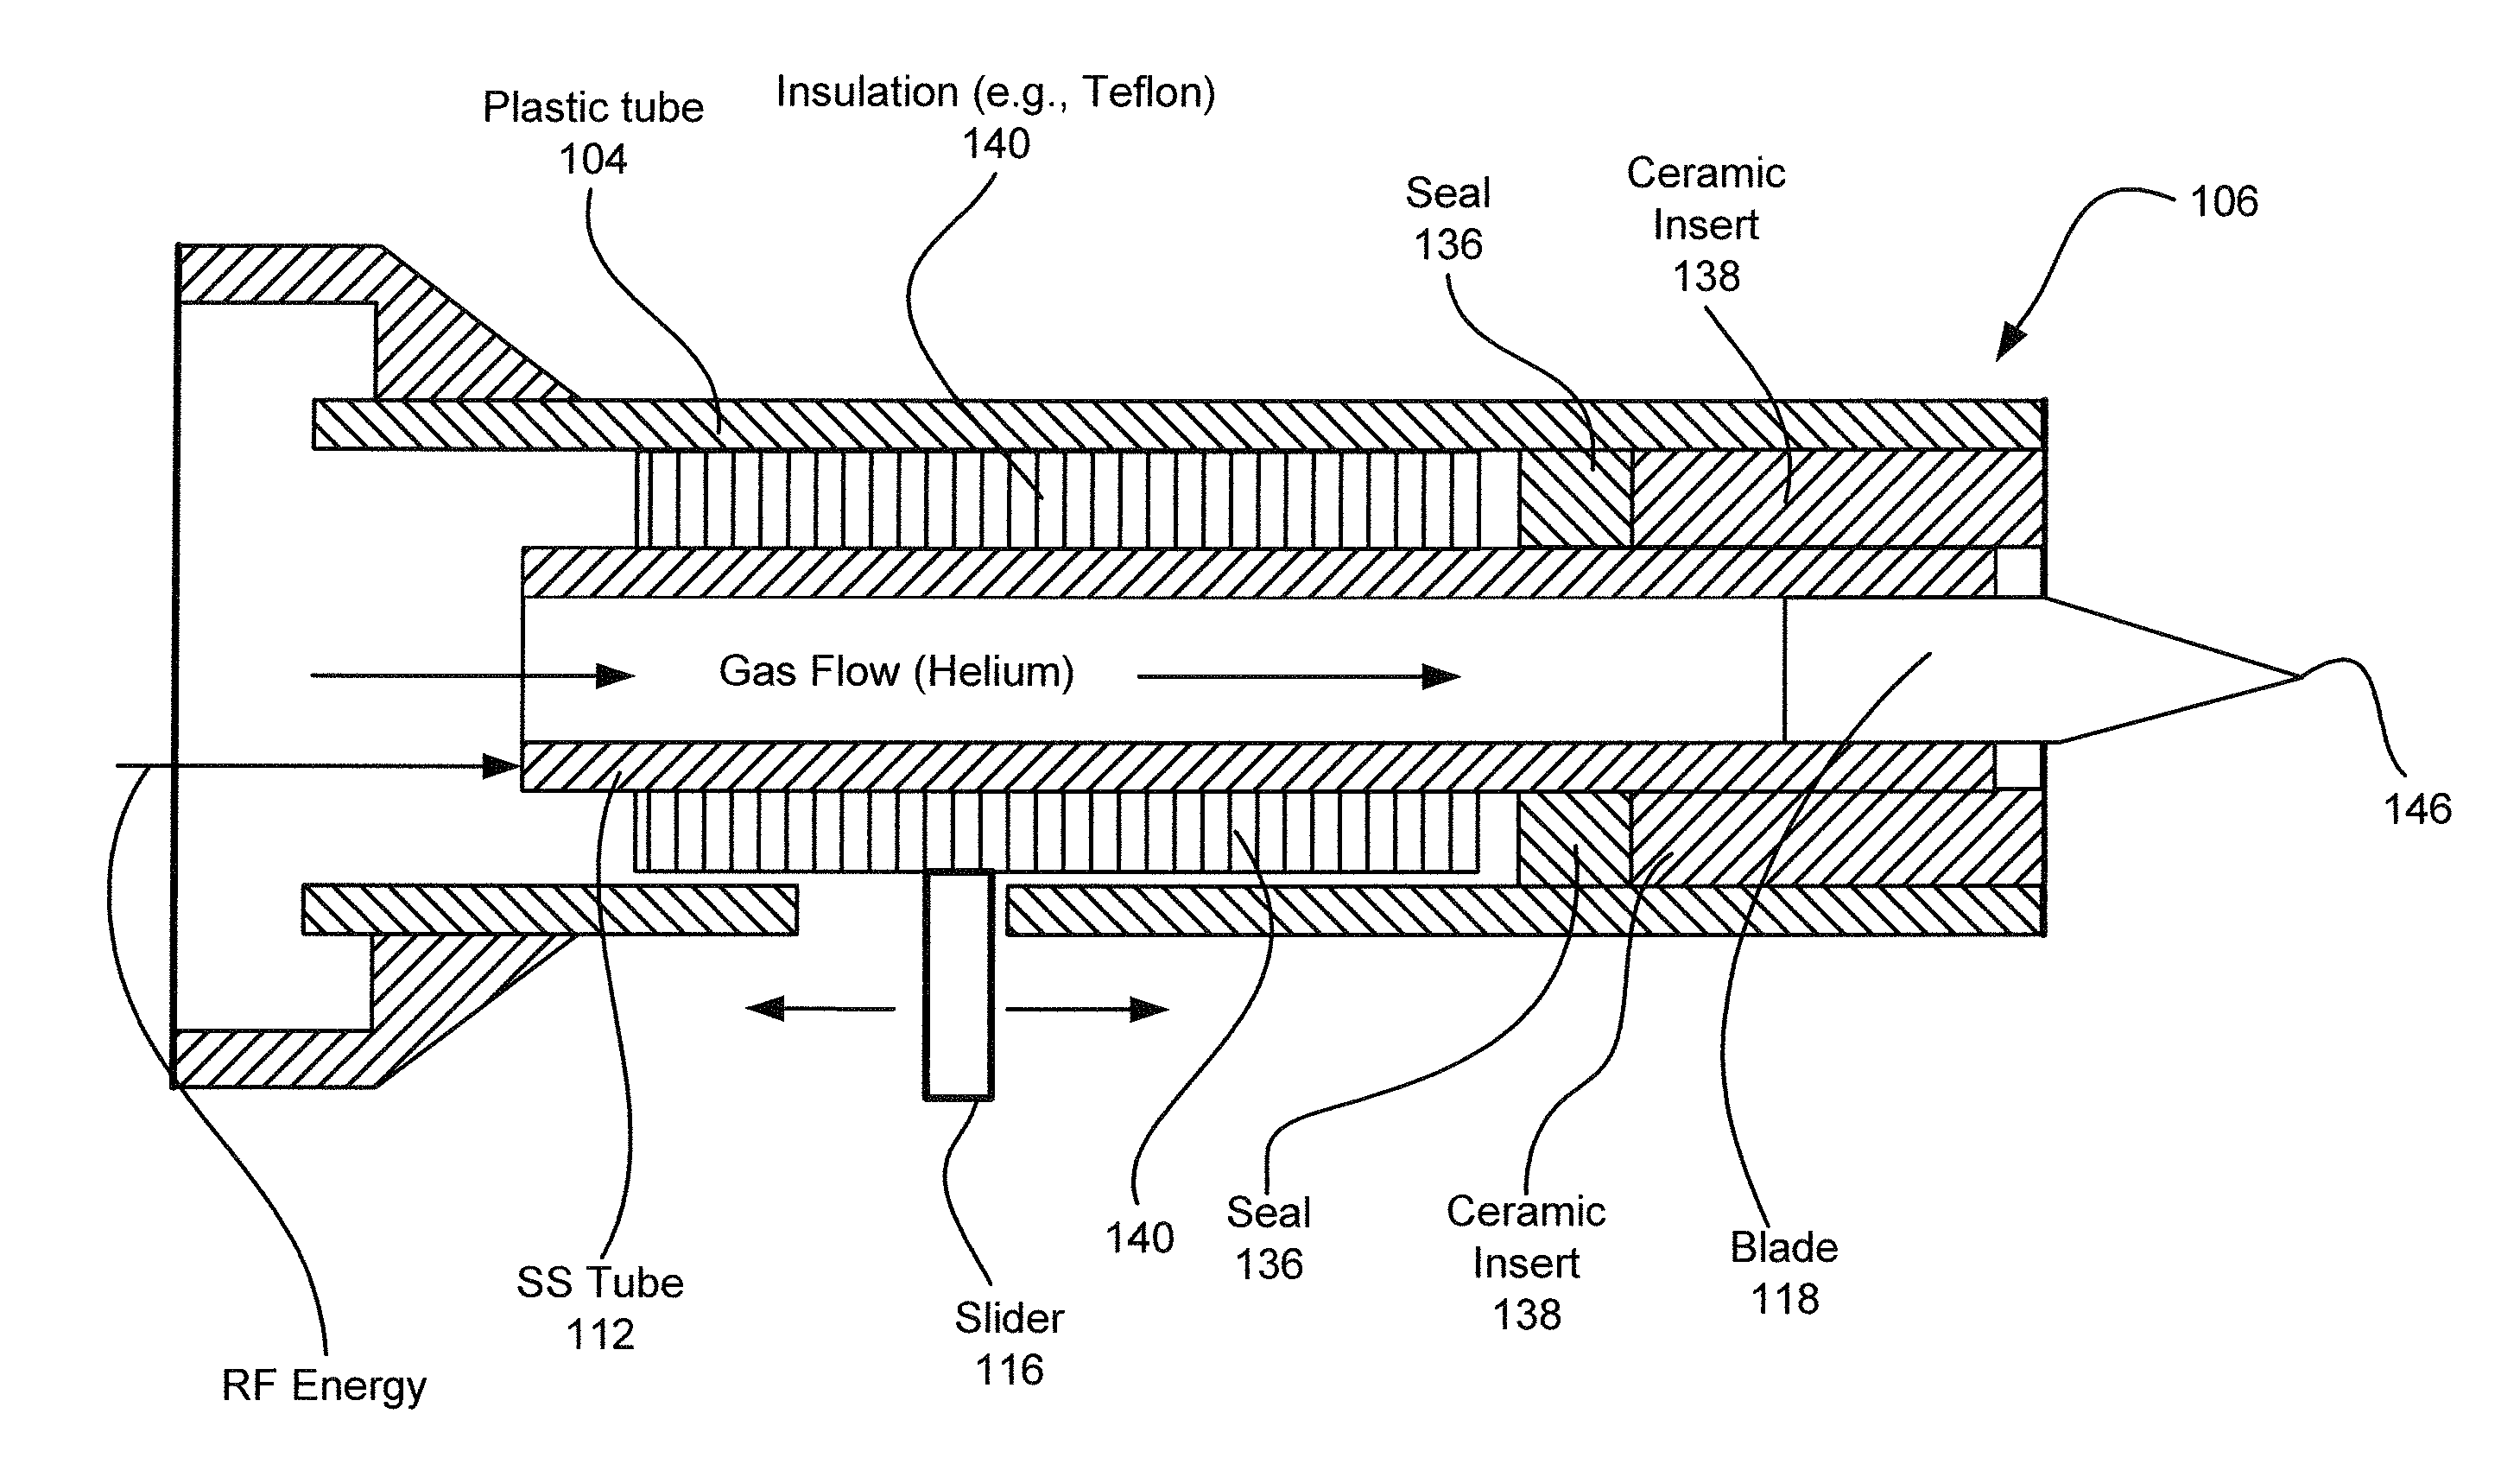 Electrosurgical apparatus with retractable blade